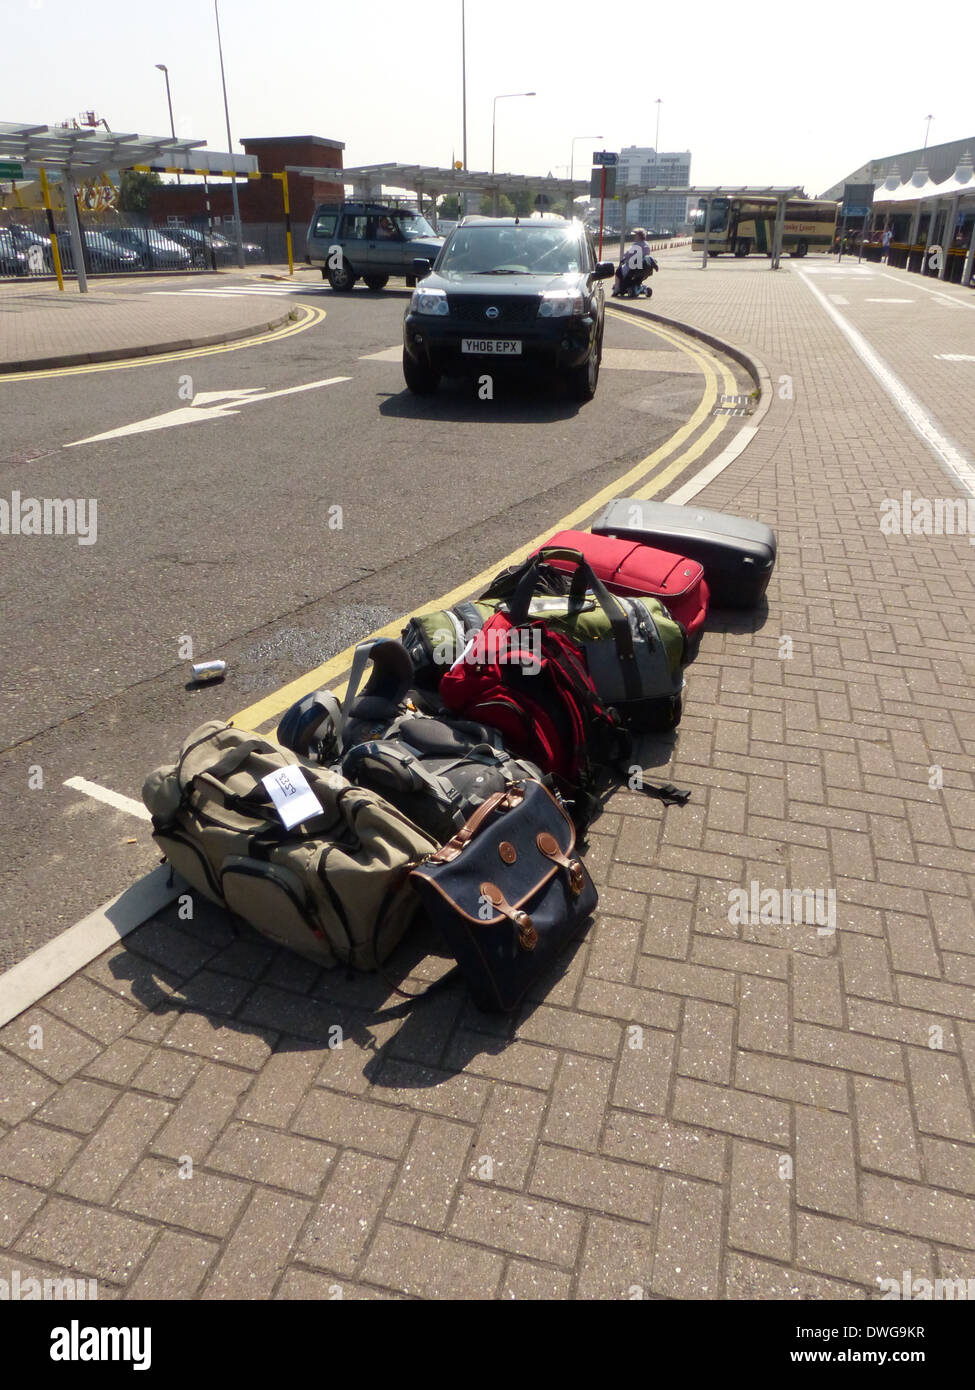 A pile of luggage on the side of the road at a cruise terminal Stock Photo